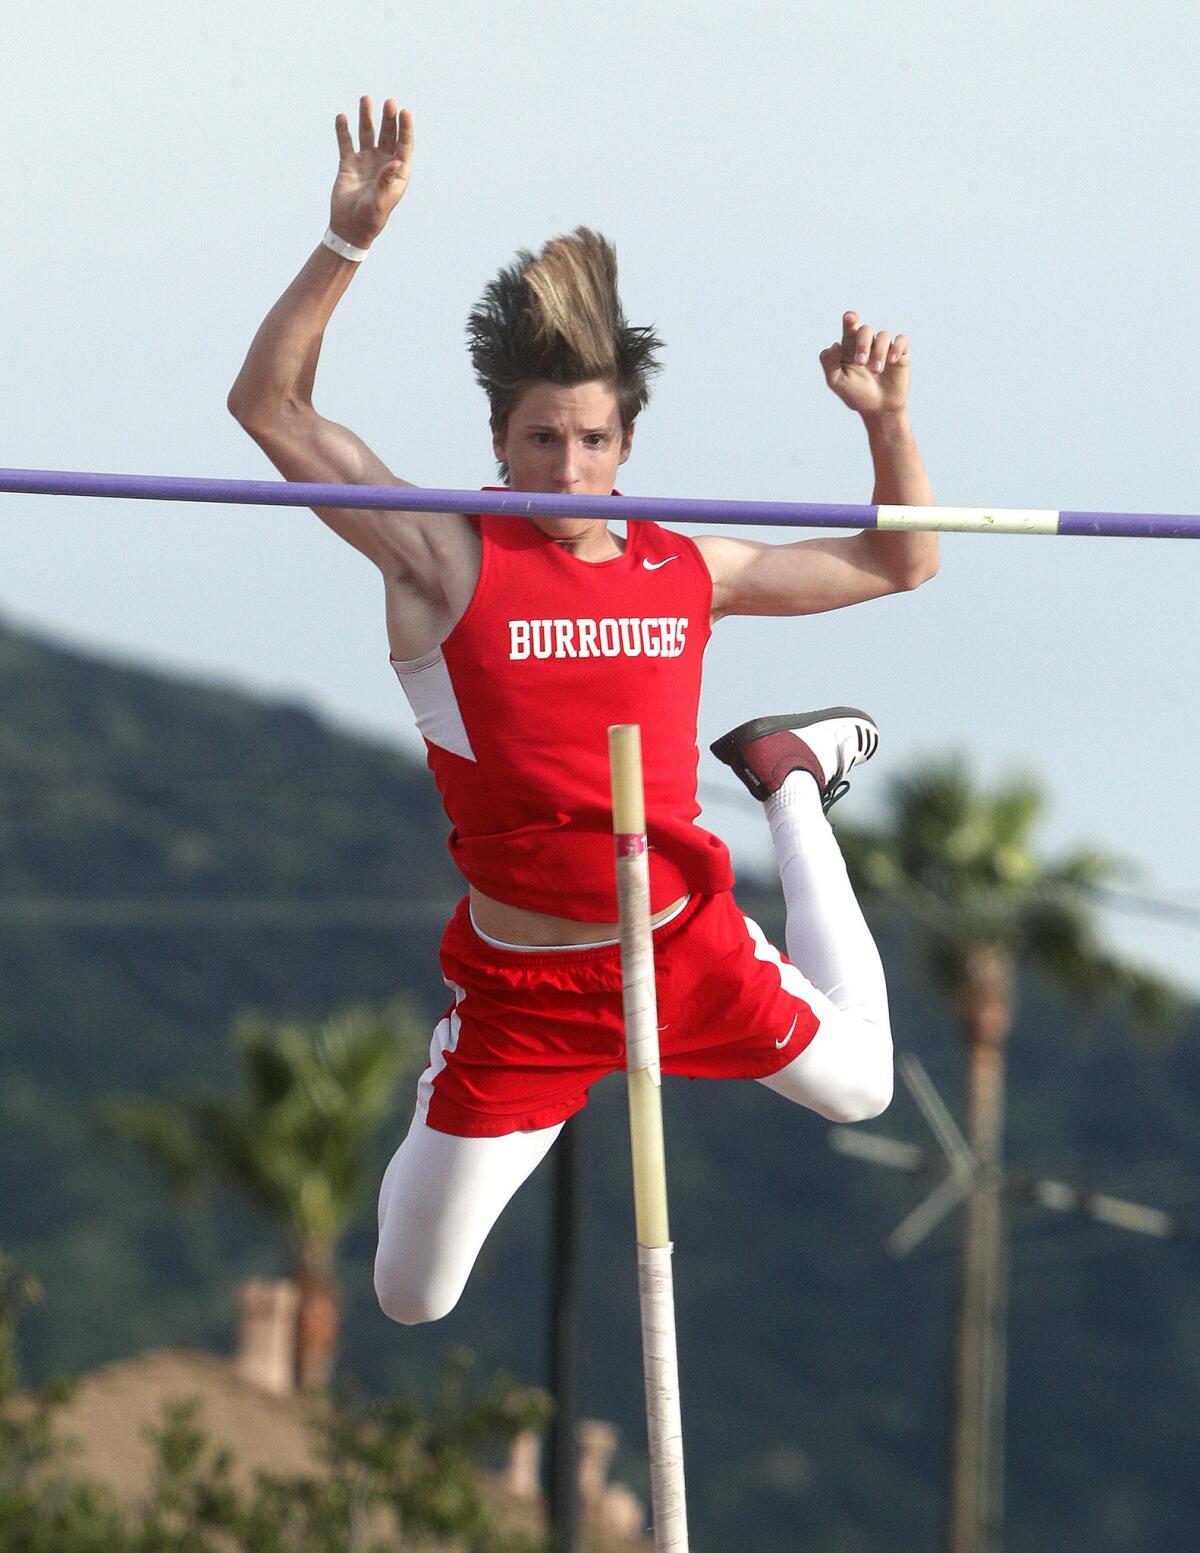 Burroughs junior Eli Gault-Crabb has found a way to stay in shape and practice pole vaulting as other athletes are figuring out how to maintain conditioning during the coronavirus outbreak.